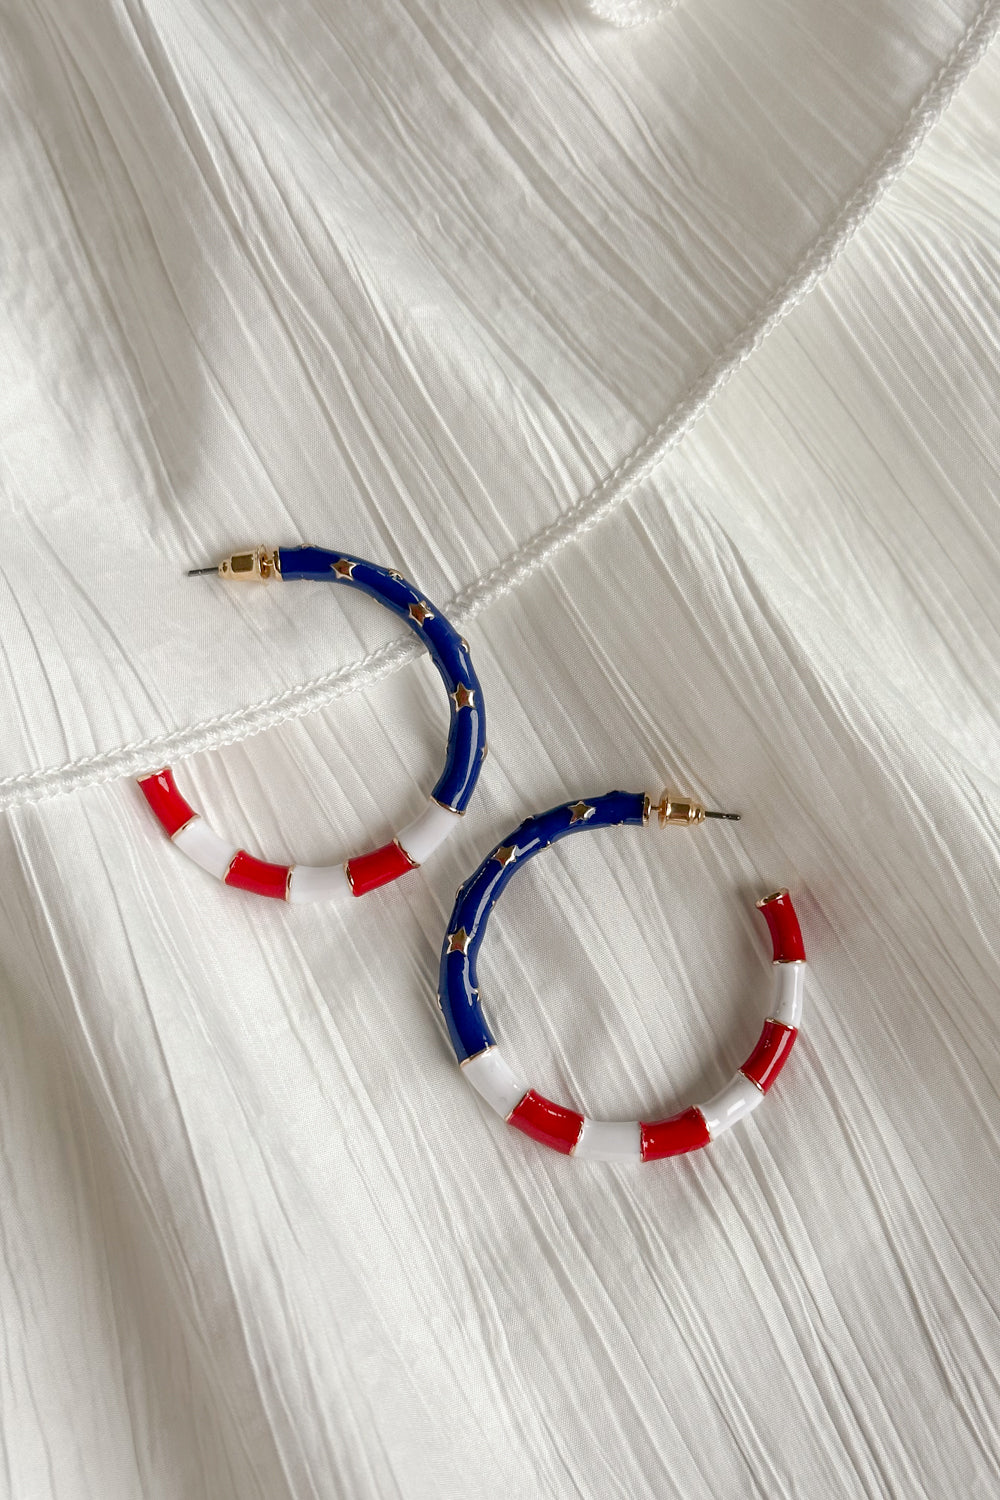 Image shows Eleanor Red, White, & Blue Hoop Earrings against a white background. Earrings feature red and white striped and a blue section with gold stars.